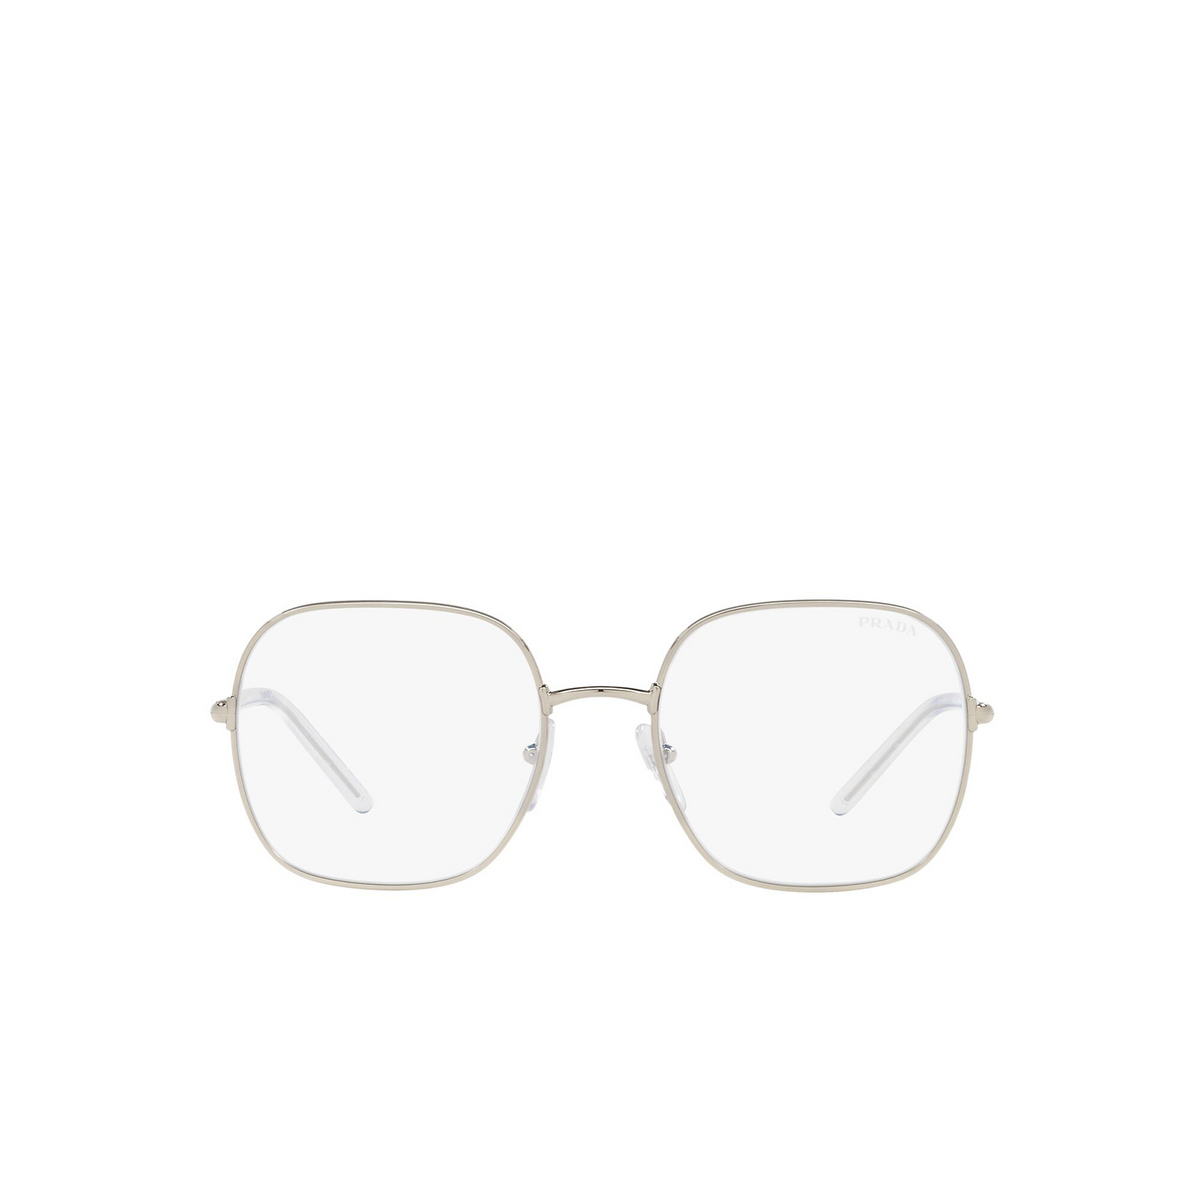 Prada® Square Sunglasses: PR 67XS color Pale Gold ZVN08N - front view.